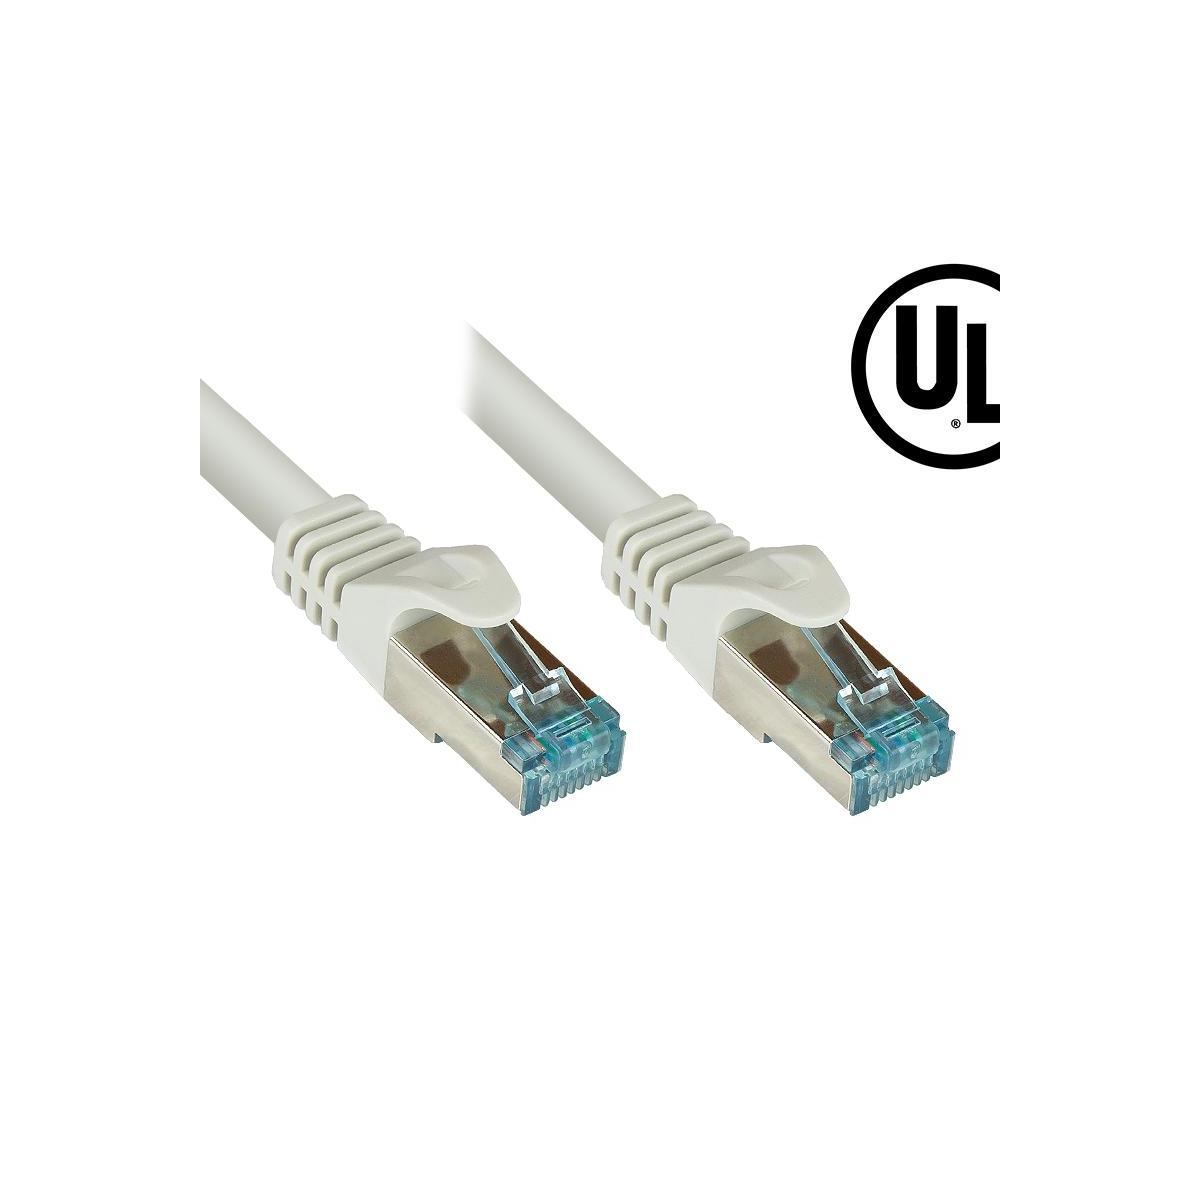 VARIA GROUP 8064-H050 Patchcable Cat.6a, Grau